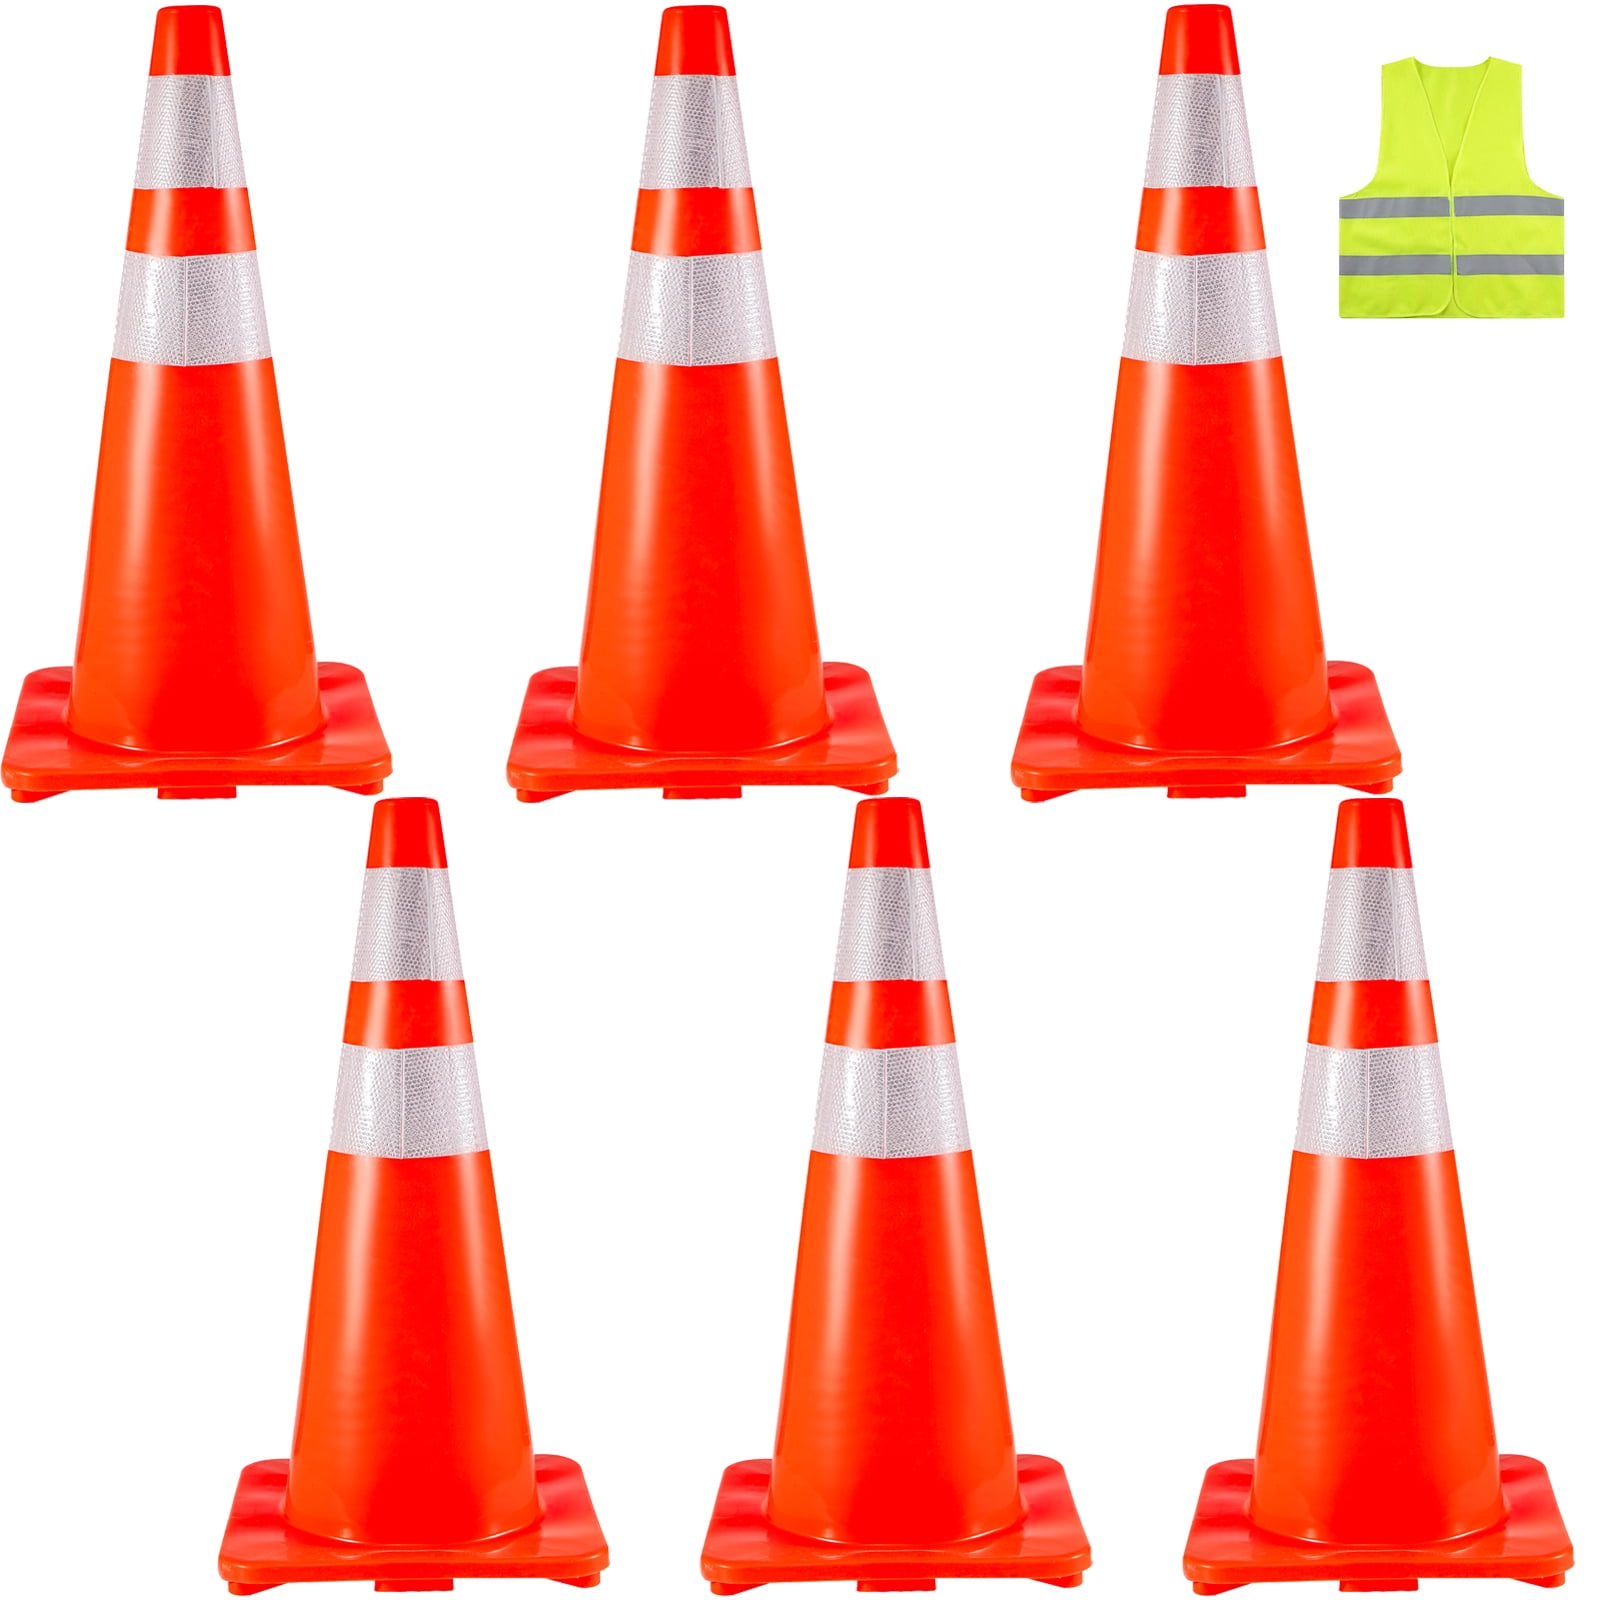 6x 28" Traffic Cones Reflective Driveway Parking Construction Safety Road Guide 